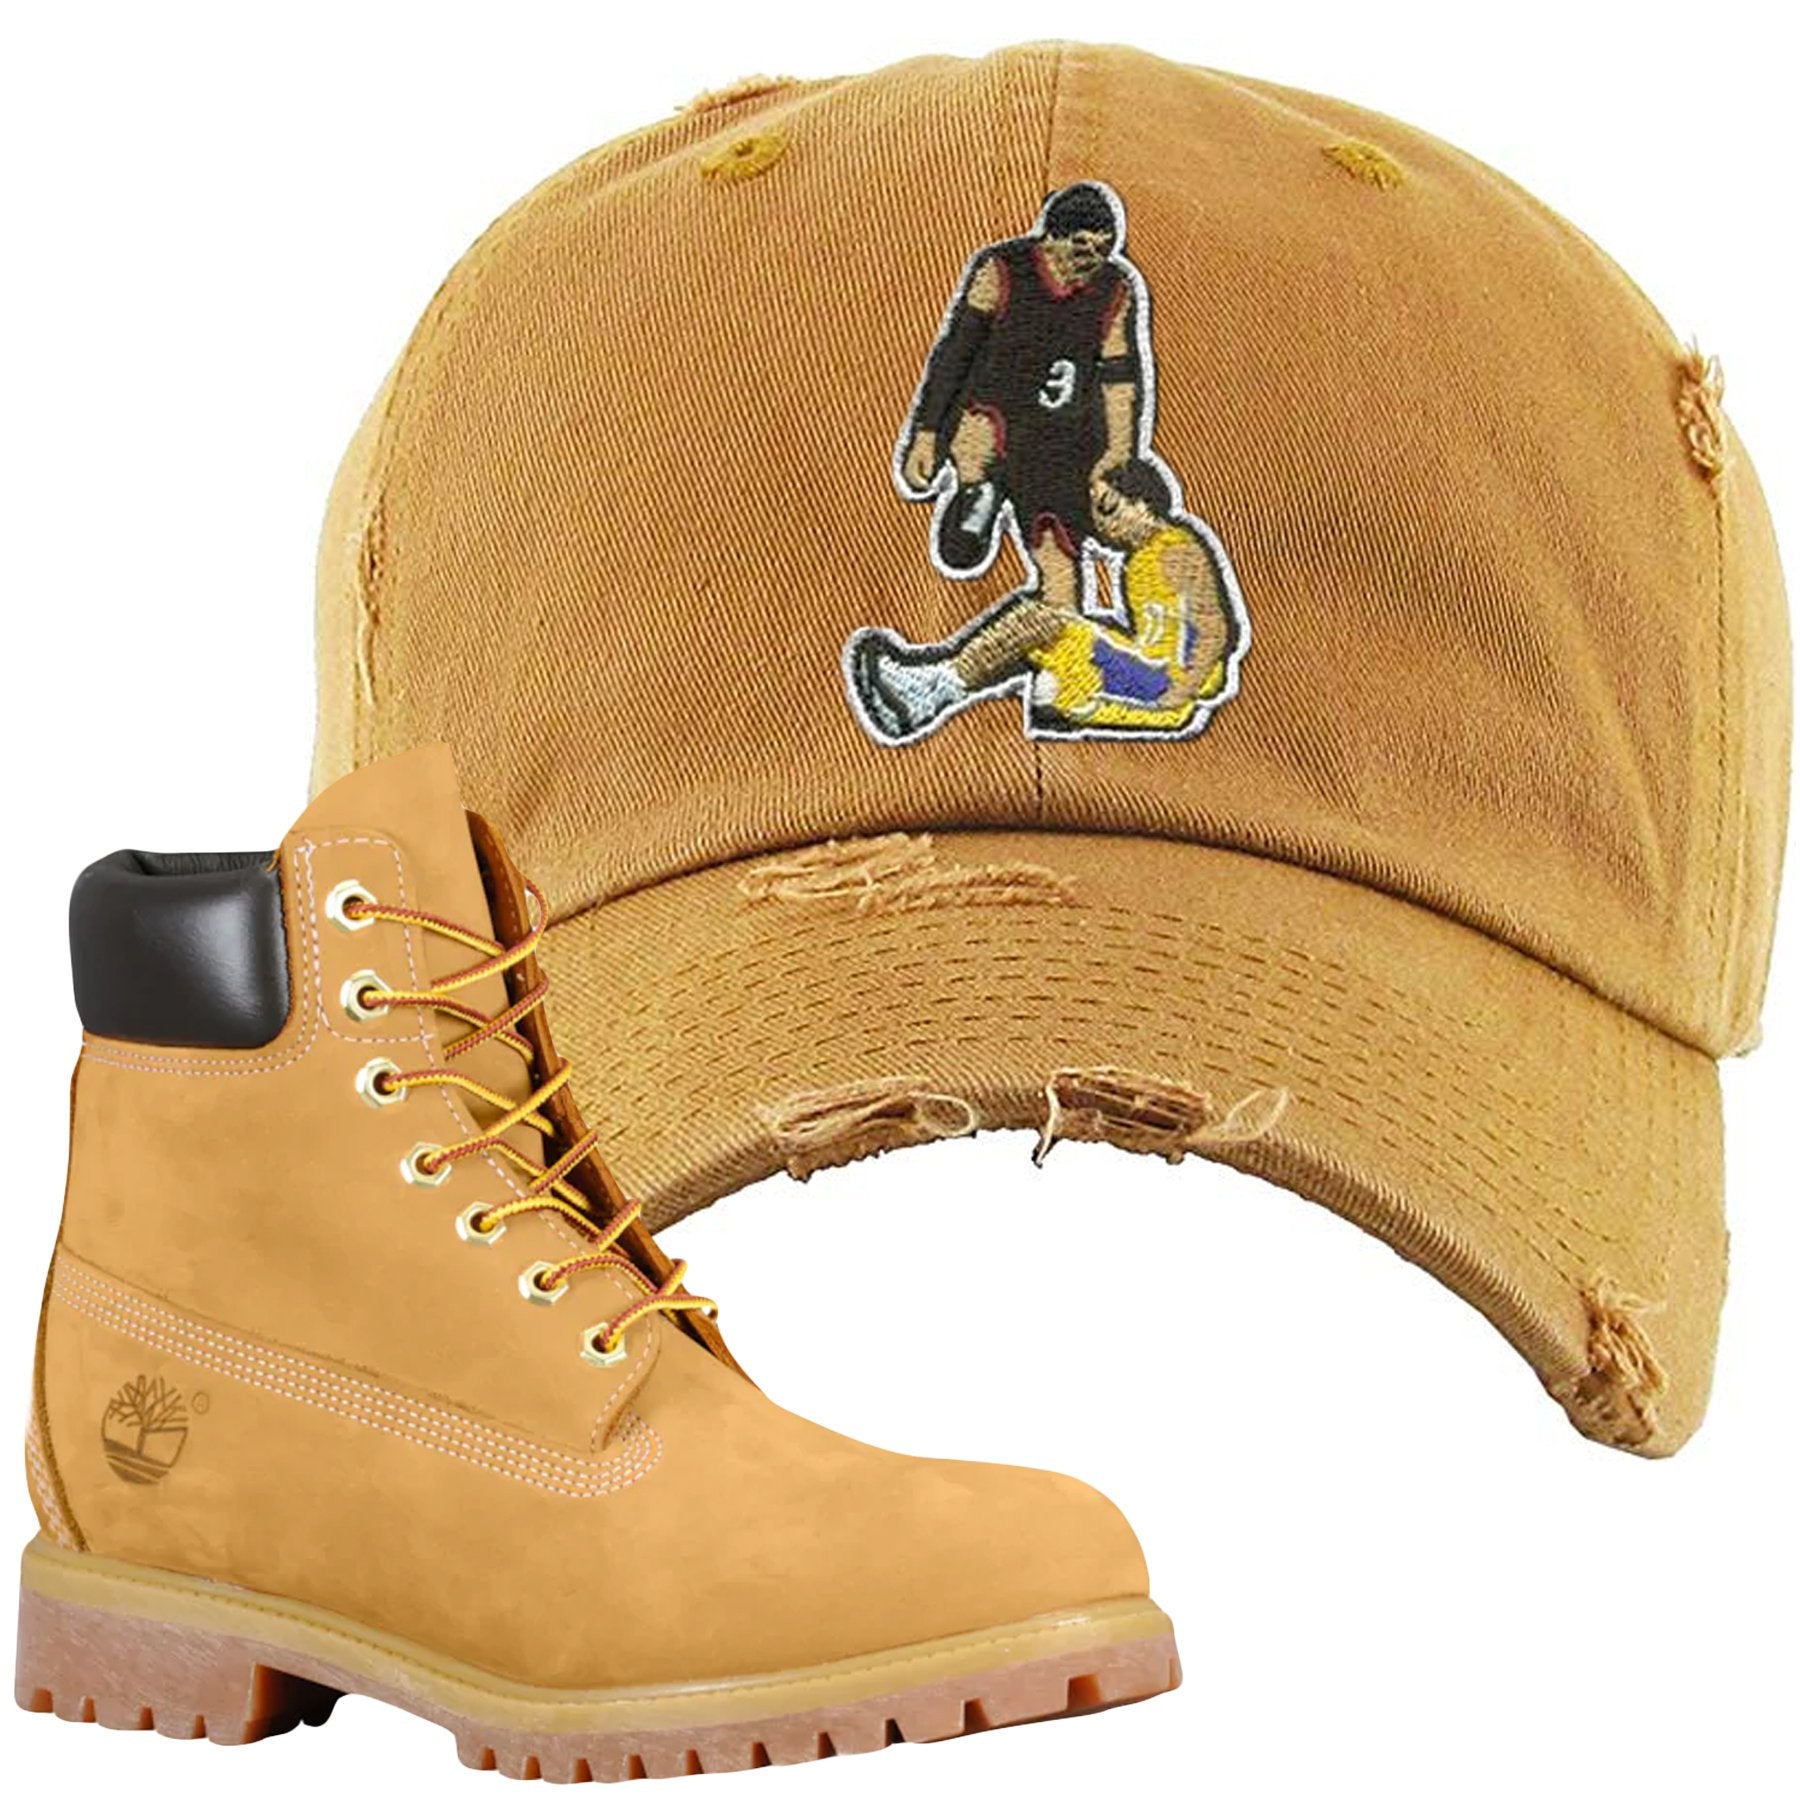 Embroidered on the front of the Timberland Wheat Timbs Boot Matching Dad Hat is a matching Timberland Wheat Timbs inspired logo